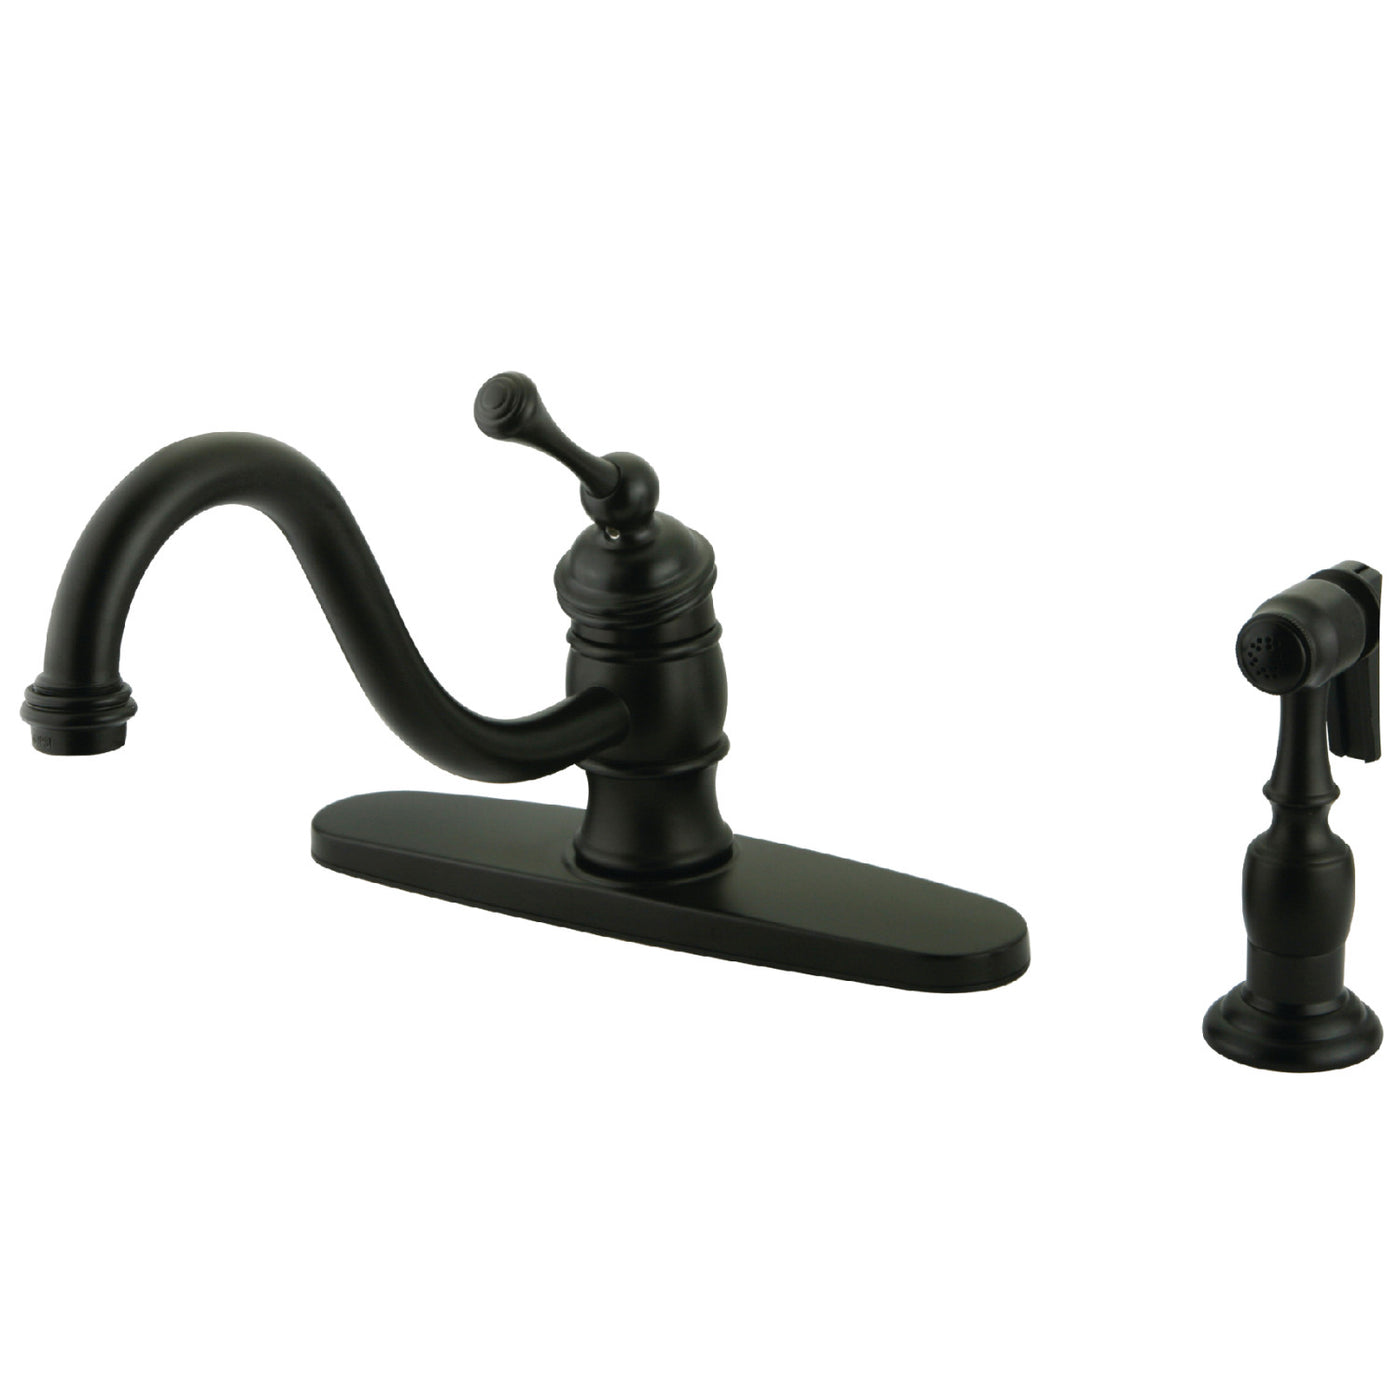 Elements of Design EB3575BLBS Single-Handle Kitchen Faucet with Brass Sprayer, Oil Rubbed Bronze